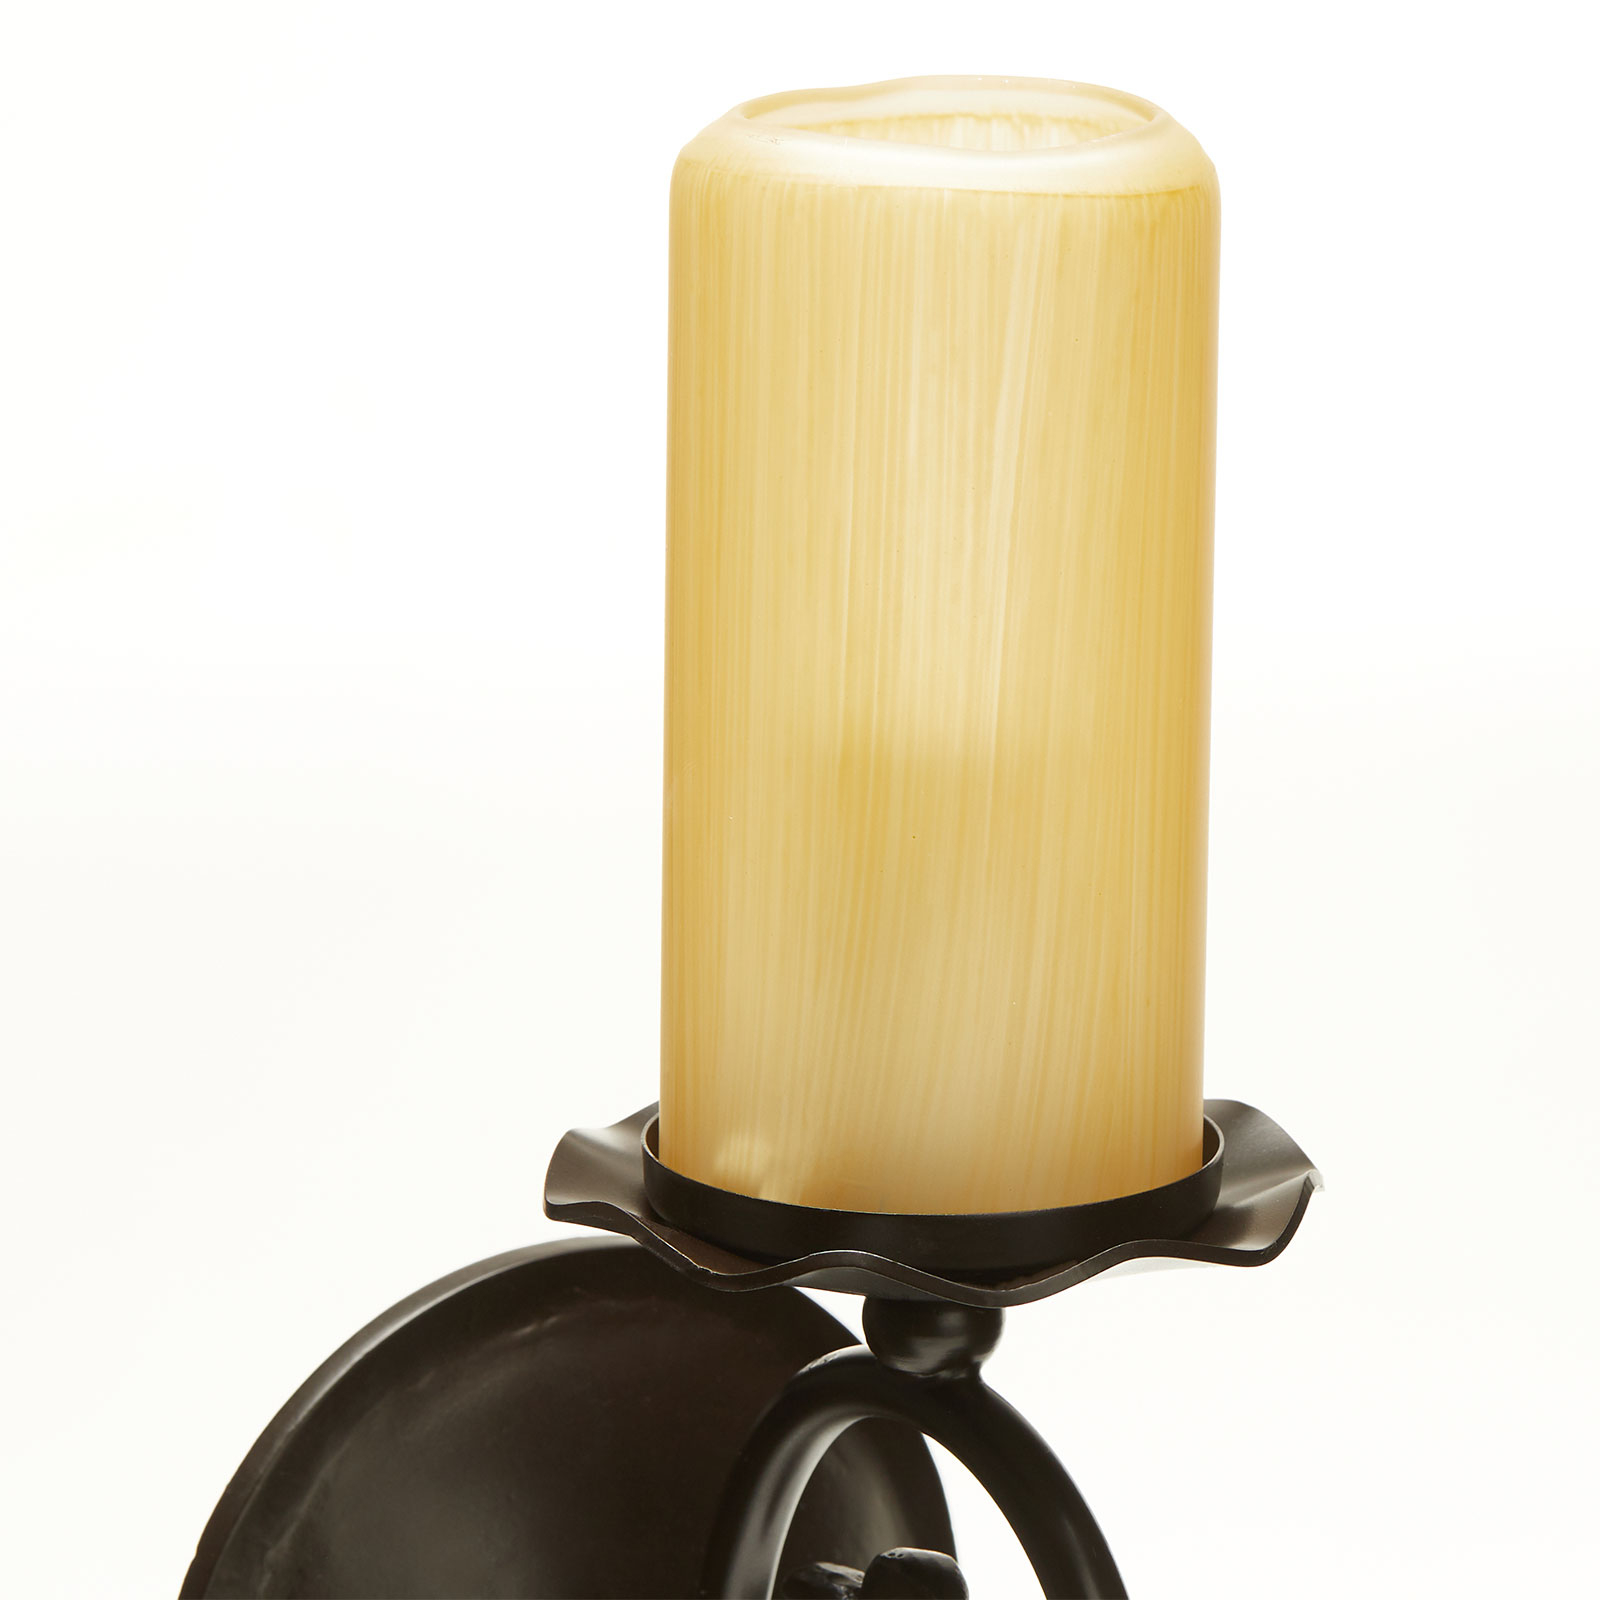 Bente wall light, lampshade with a candle look